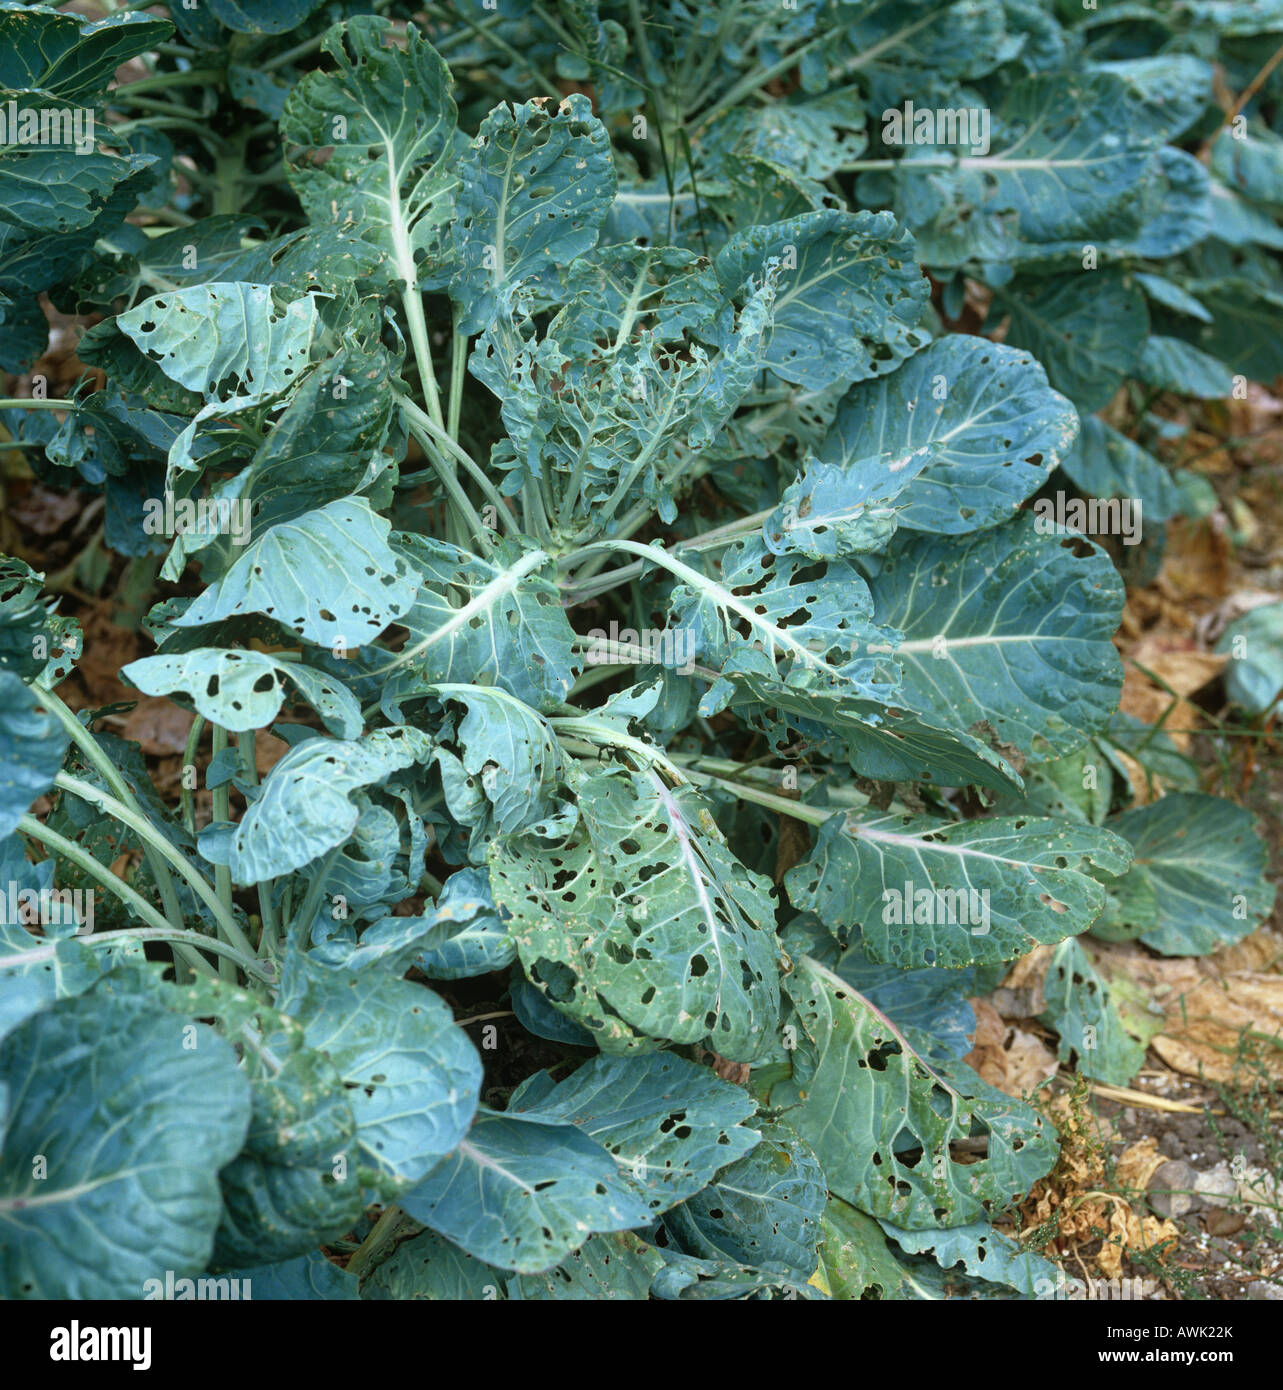 Cabbage white butterfly Pieris sp feeding damage to maturing brussel sprout plant Stock Photo